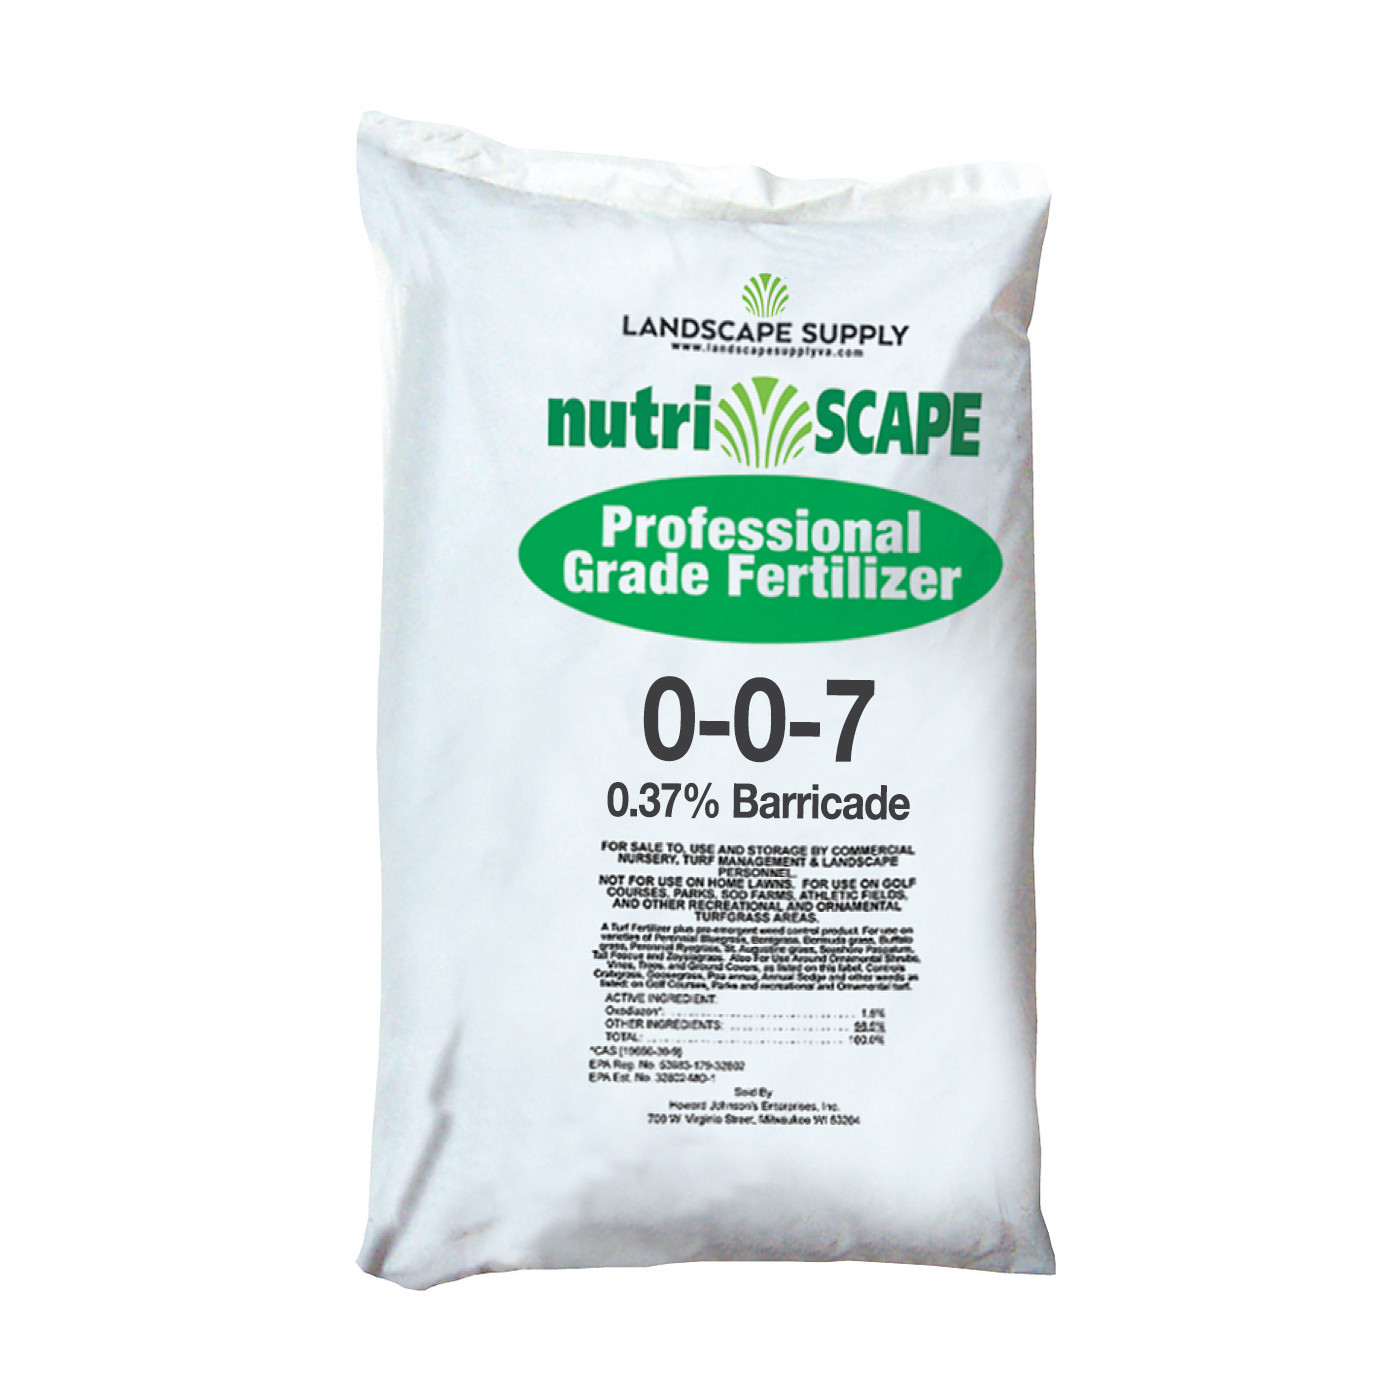 What Is 0-0-7 Fertilizer Used For